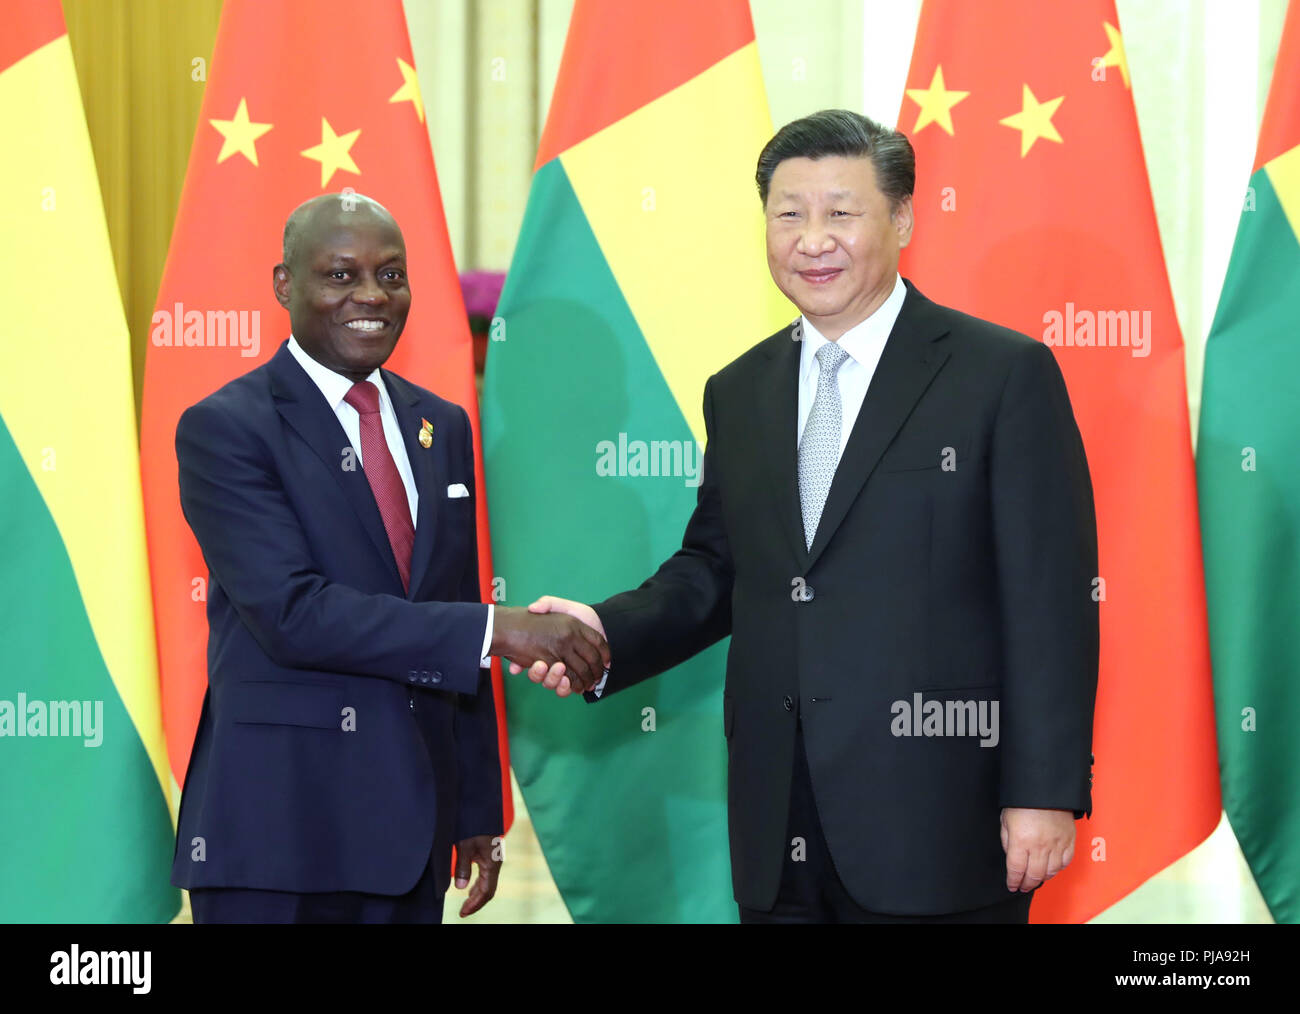 (180905) -- BEIJING, Sept. 5, 2018 (Xinhua) -- Chinese President Xi Jinping (R) meets with Guinea-Bissau's President Jose Mario Vaz at the Great Hall of the People in Beijing, capital of China, Sept. 5, 2018. (Xinhua/Huang Jingwen)(mcg) Stock Photo